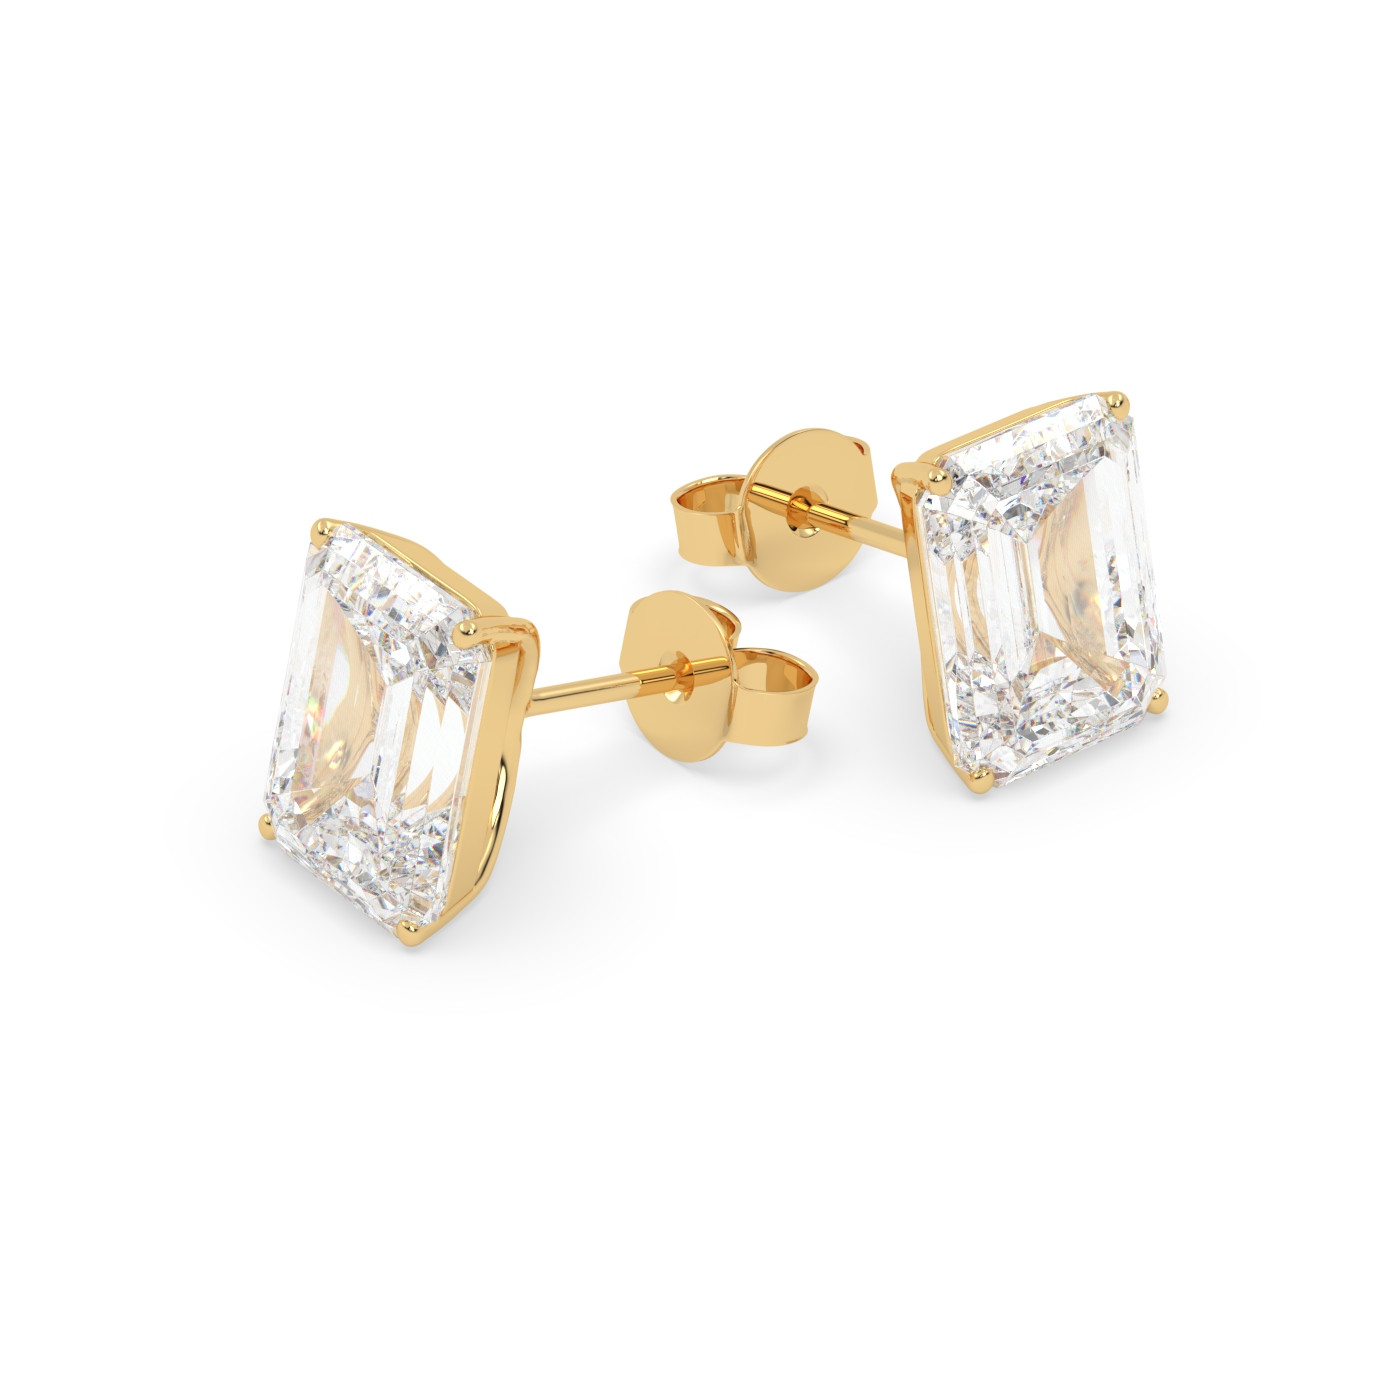 18K YELLOW GOLD Emerald Stud Earrings with butterfly back